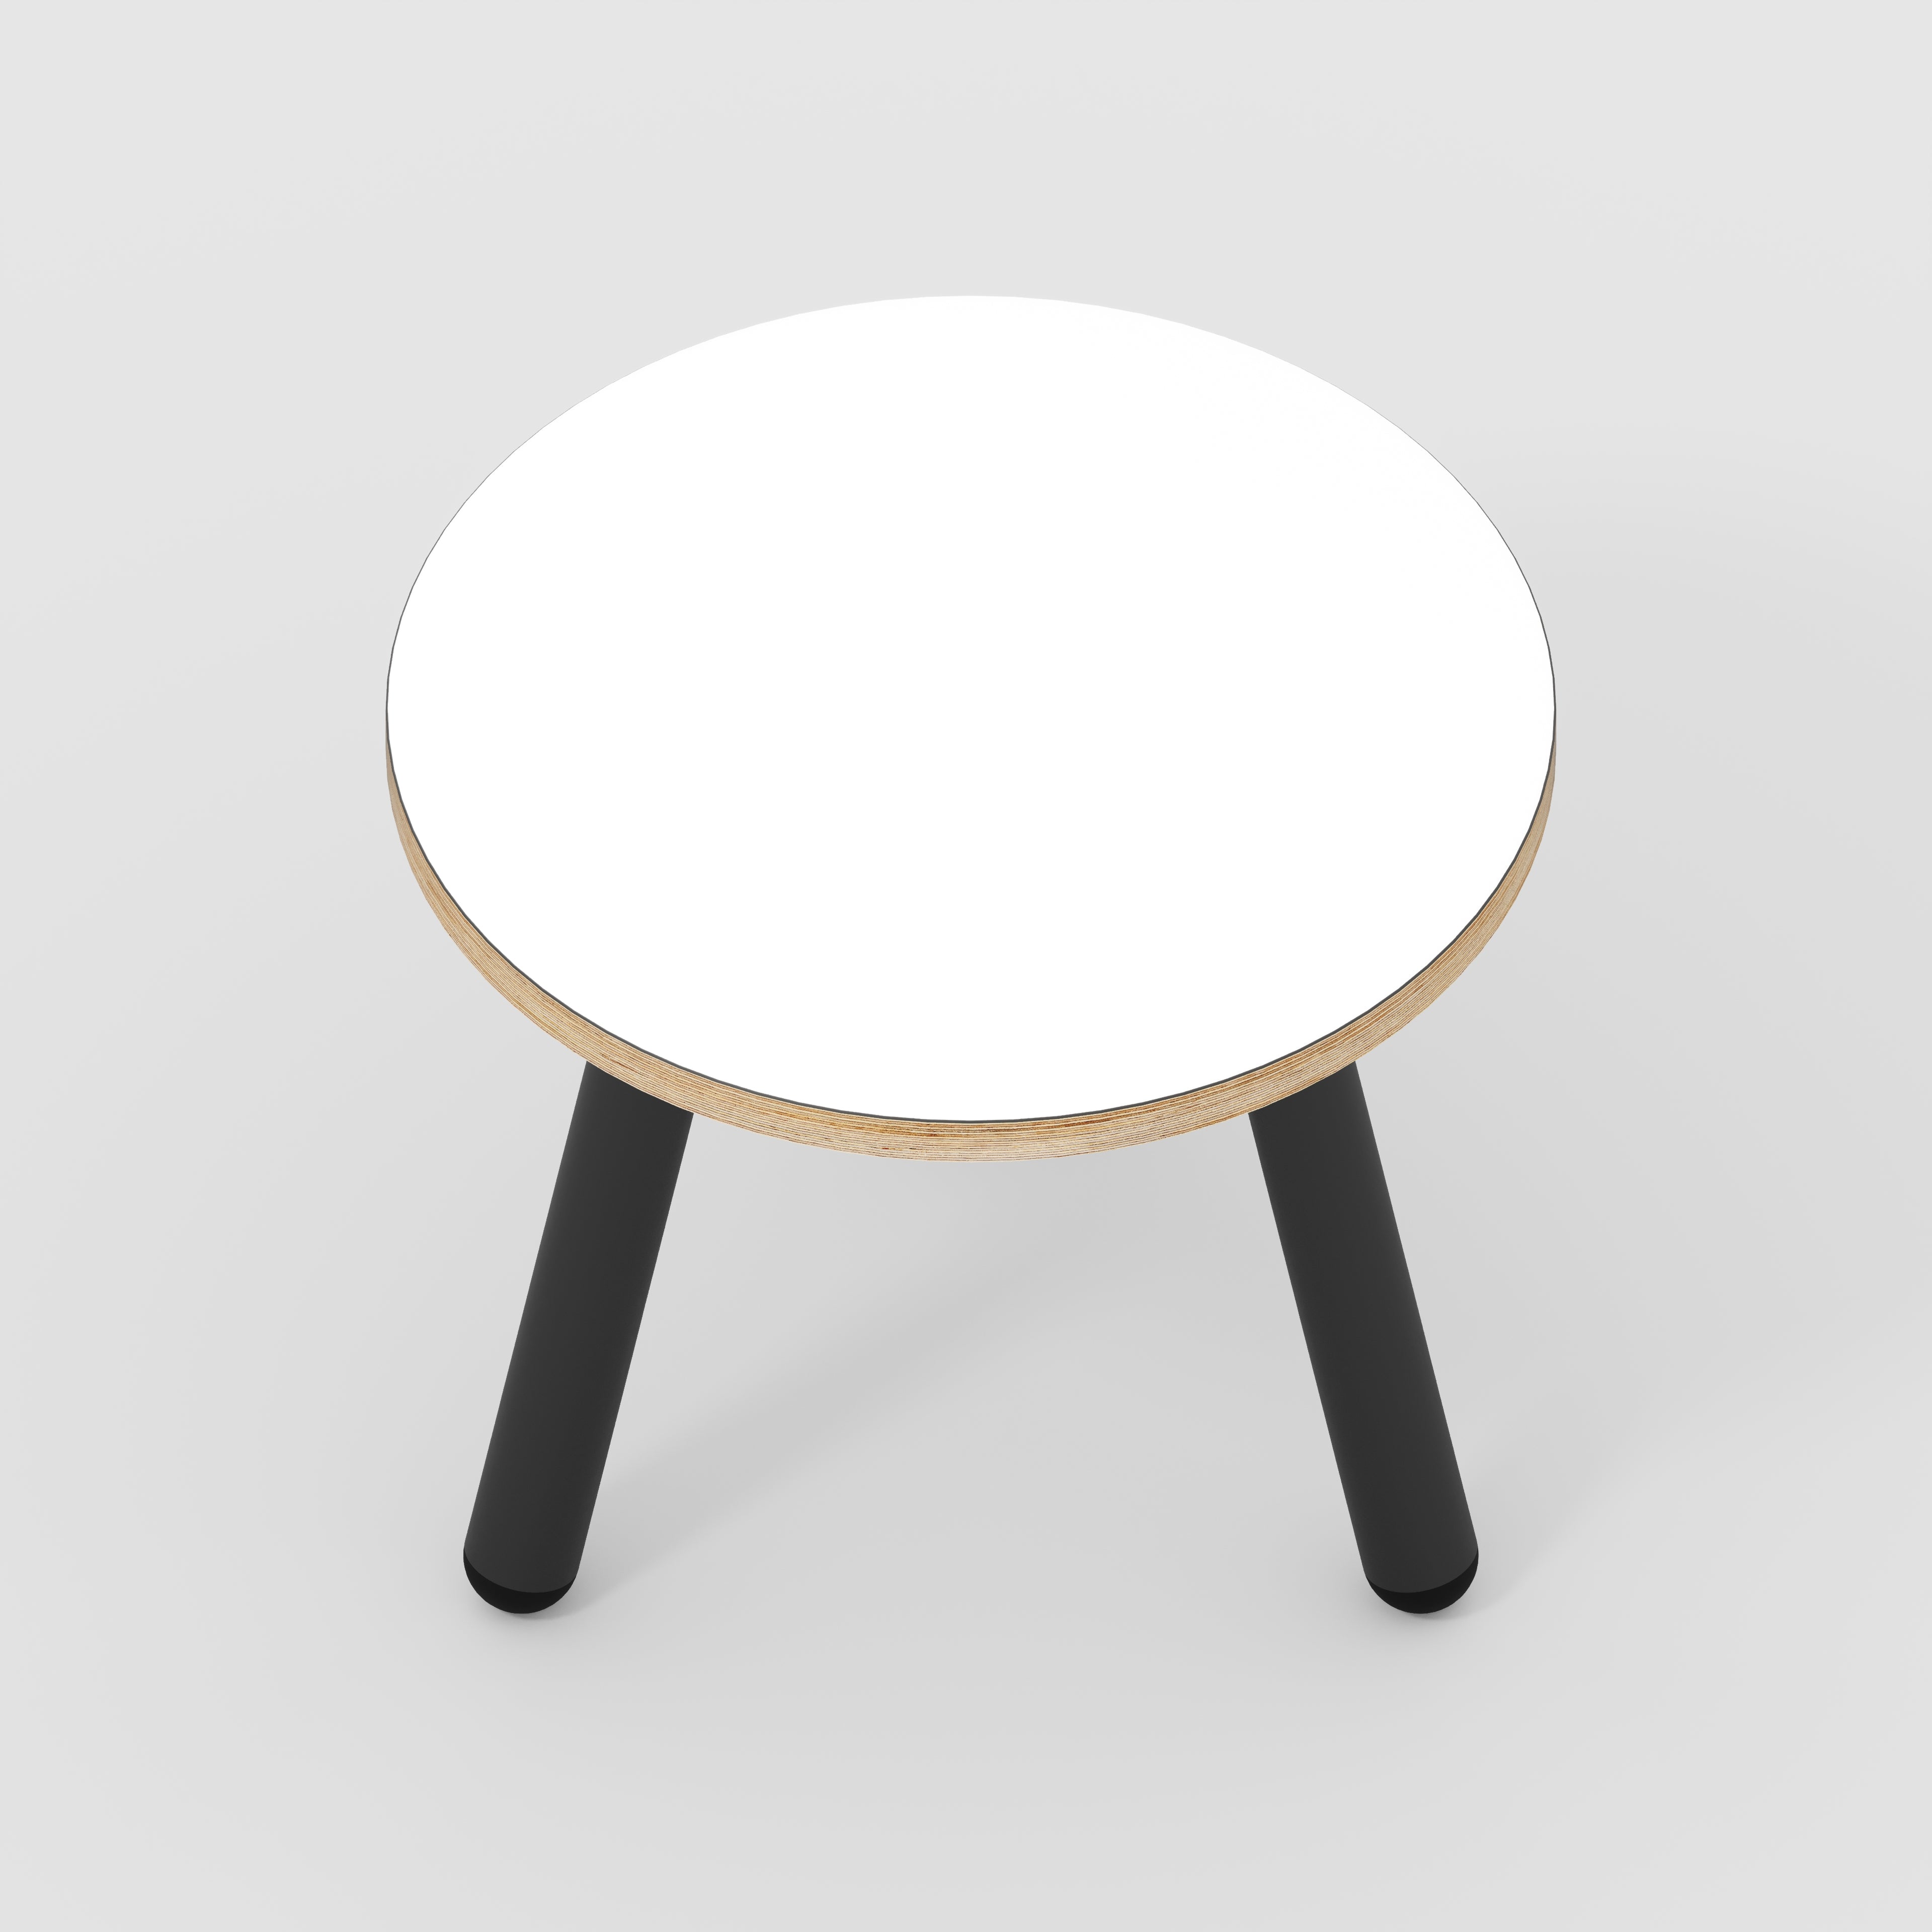 Round Side Table with Black Round Single Pin Legs - Formica White - 500(w) x 500(d) x 425(h)